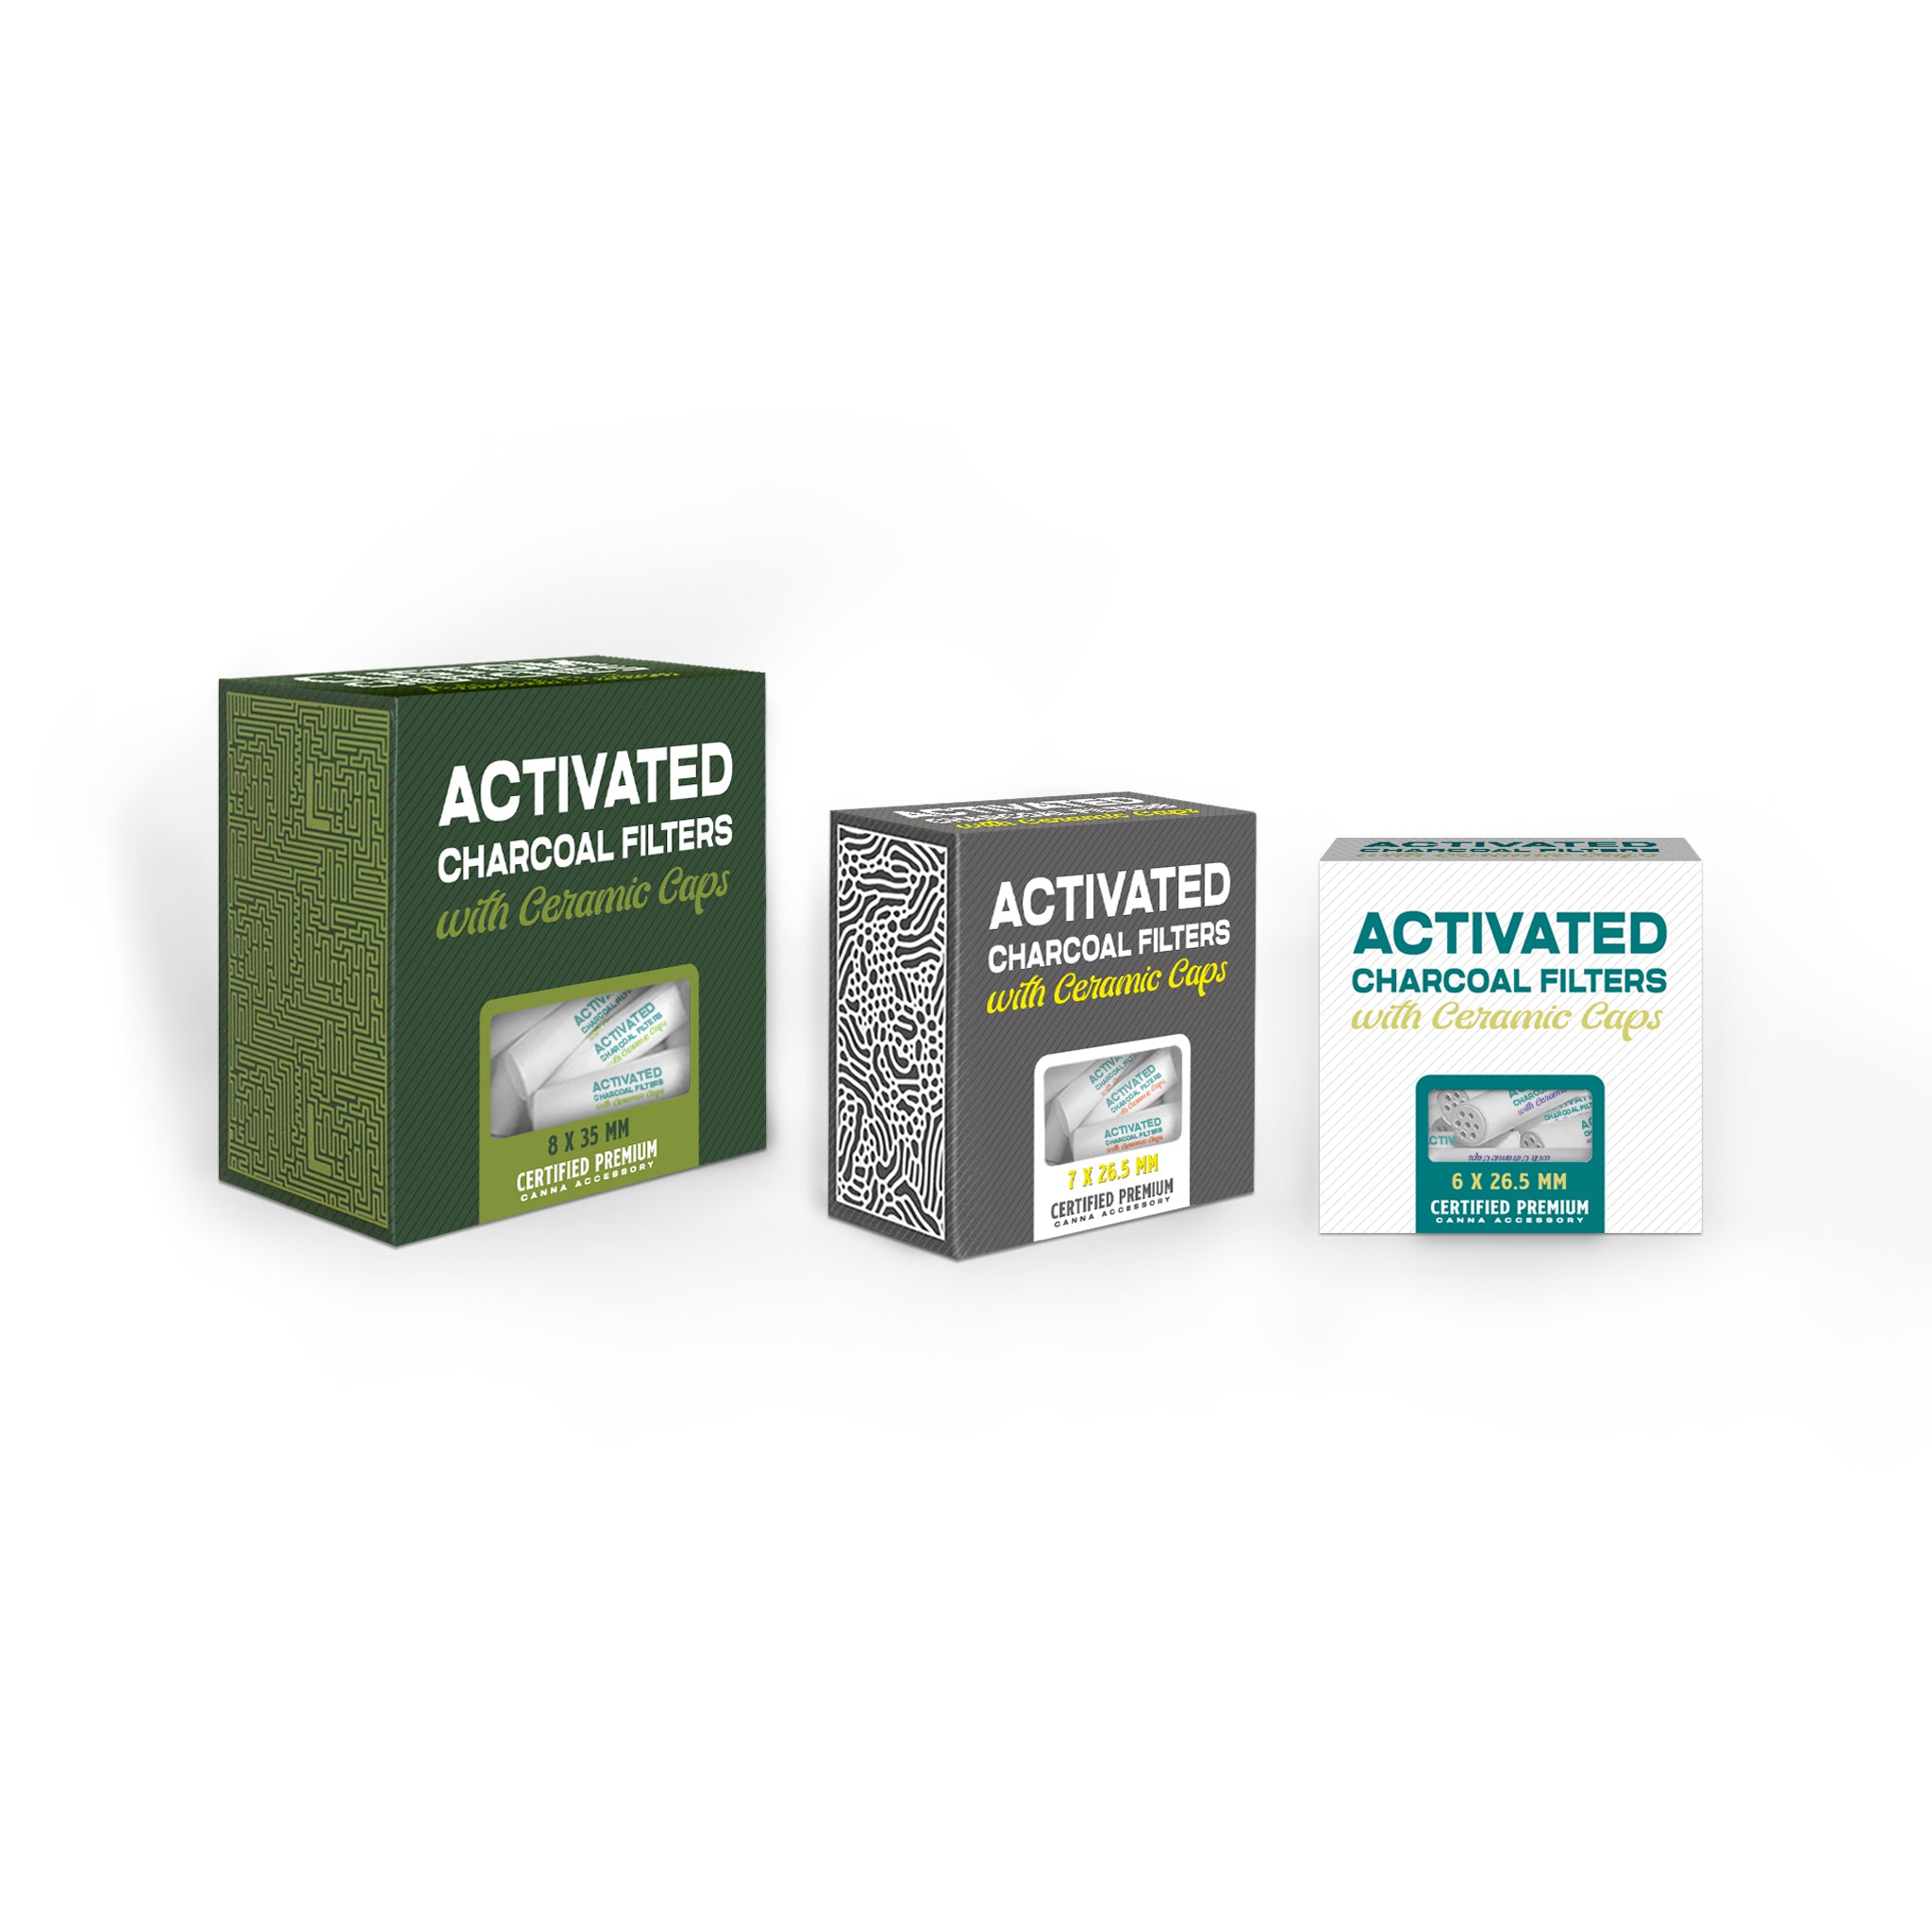 Activated Carbon Filters Regular 8 x 35 mm (actiTube)